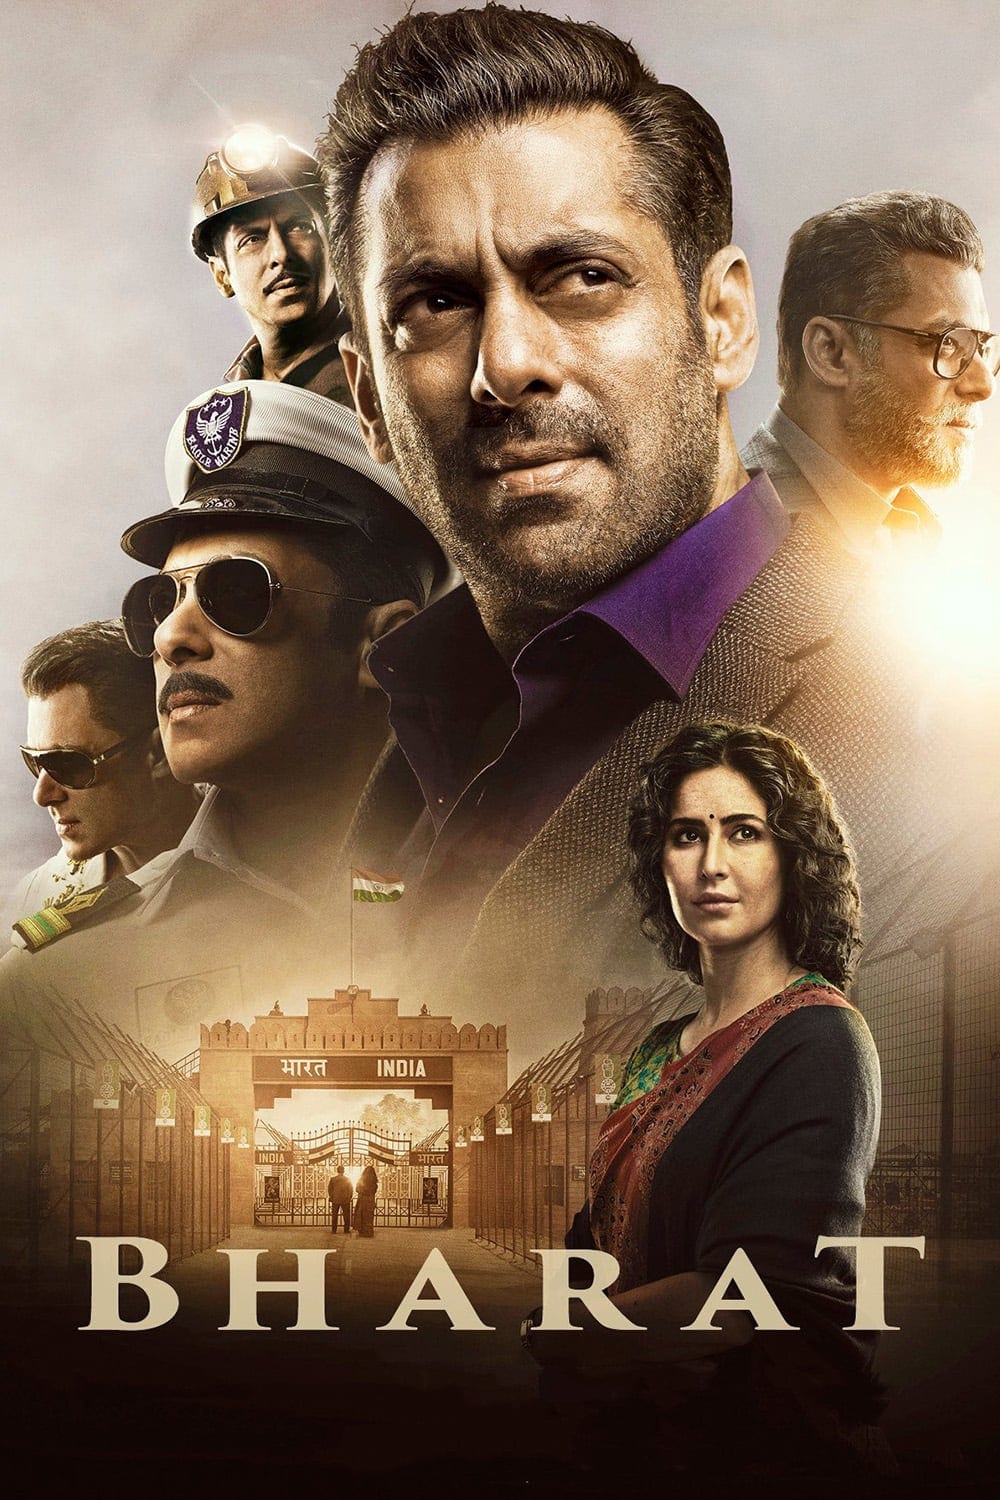 Poster for the movie "Bharat"